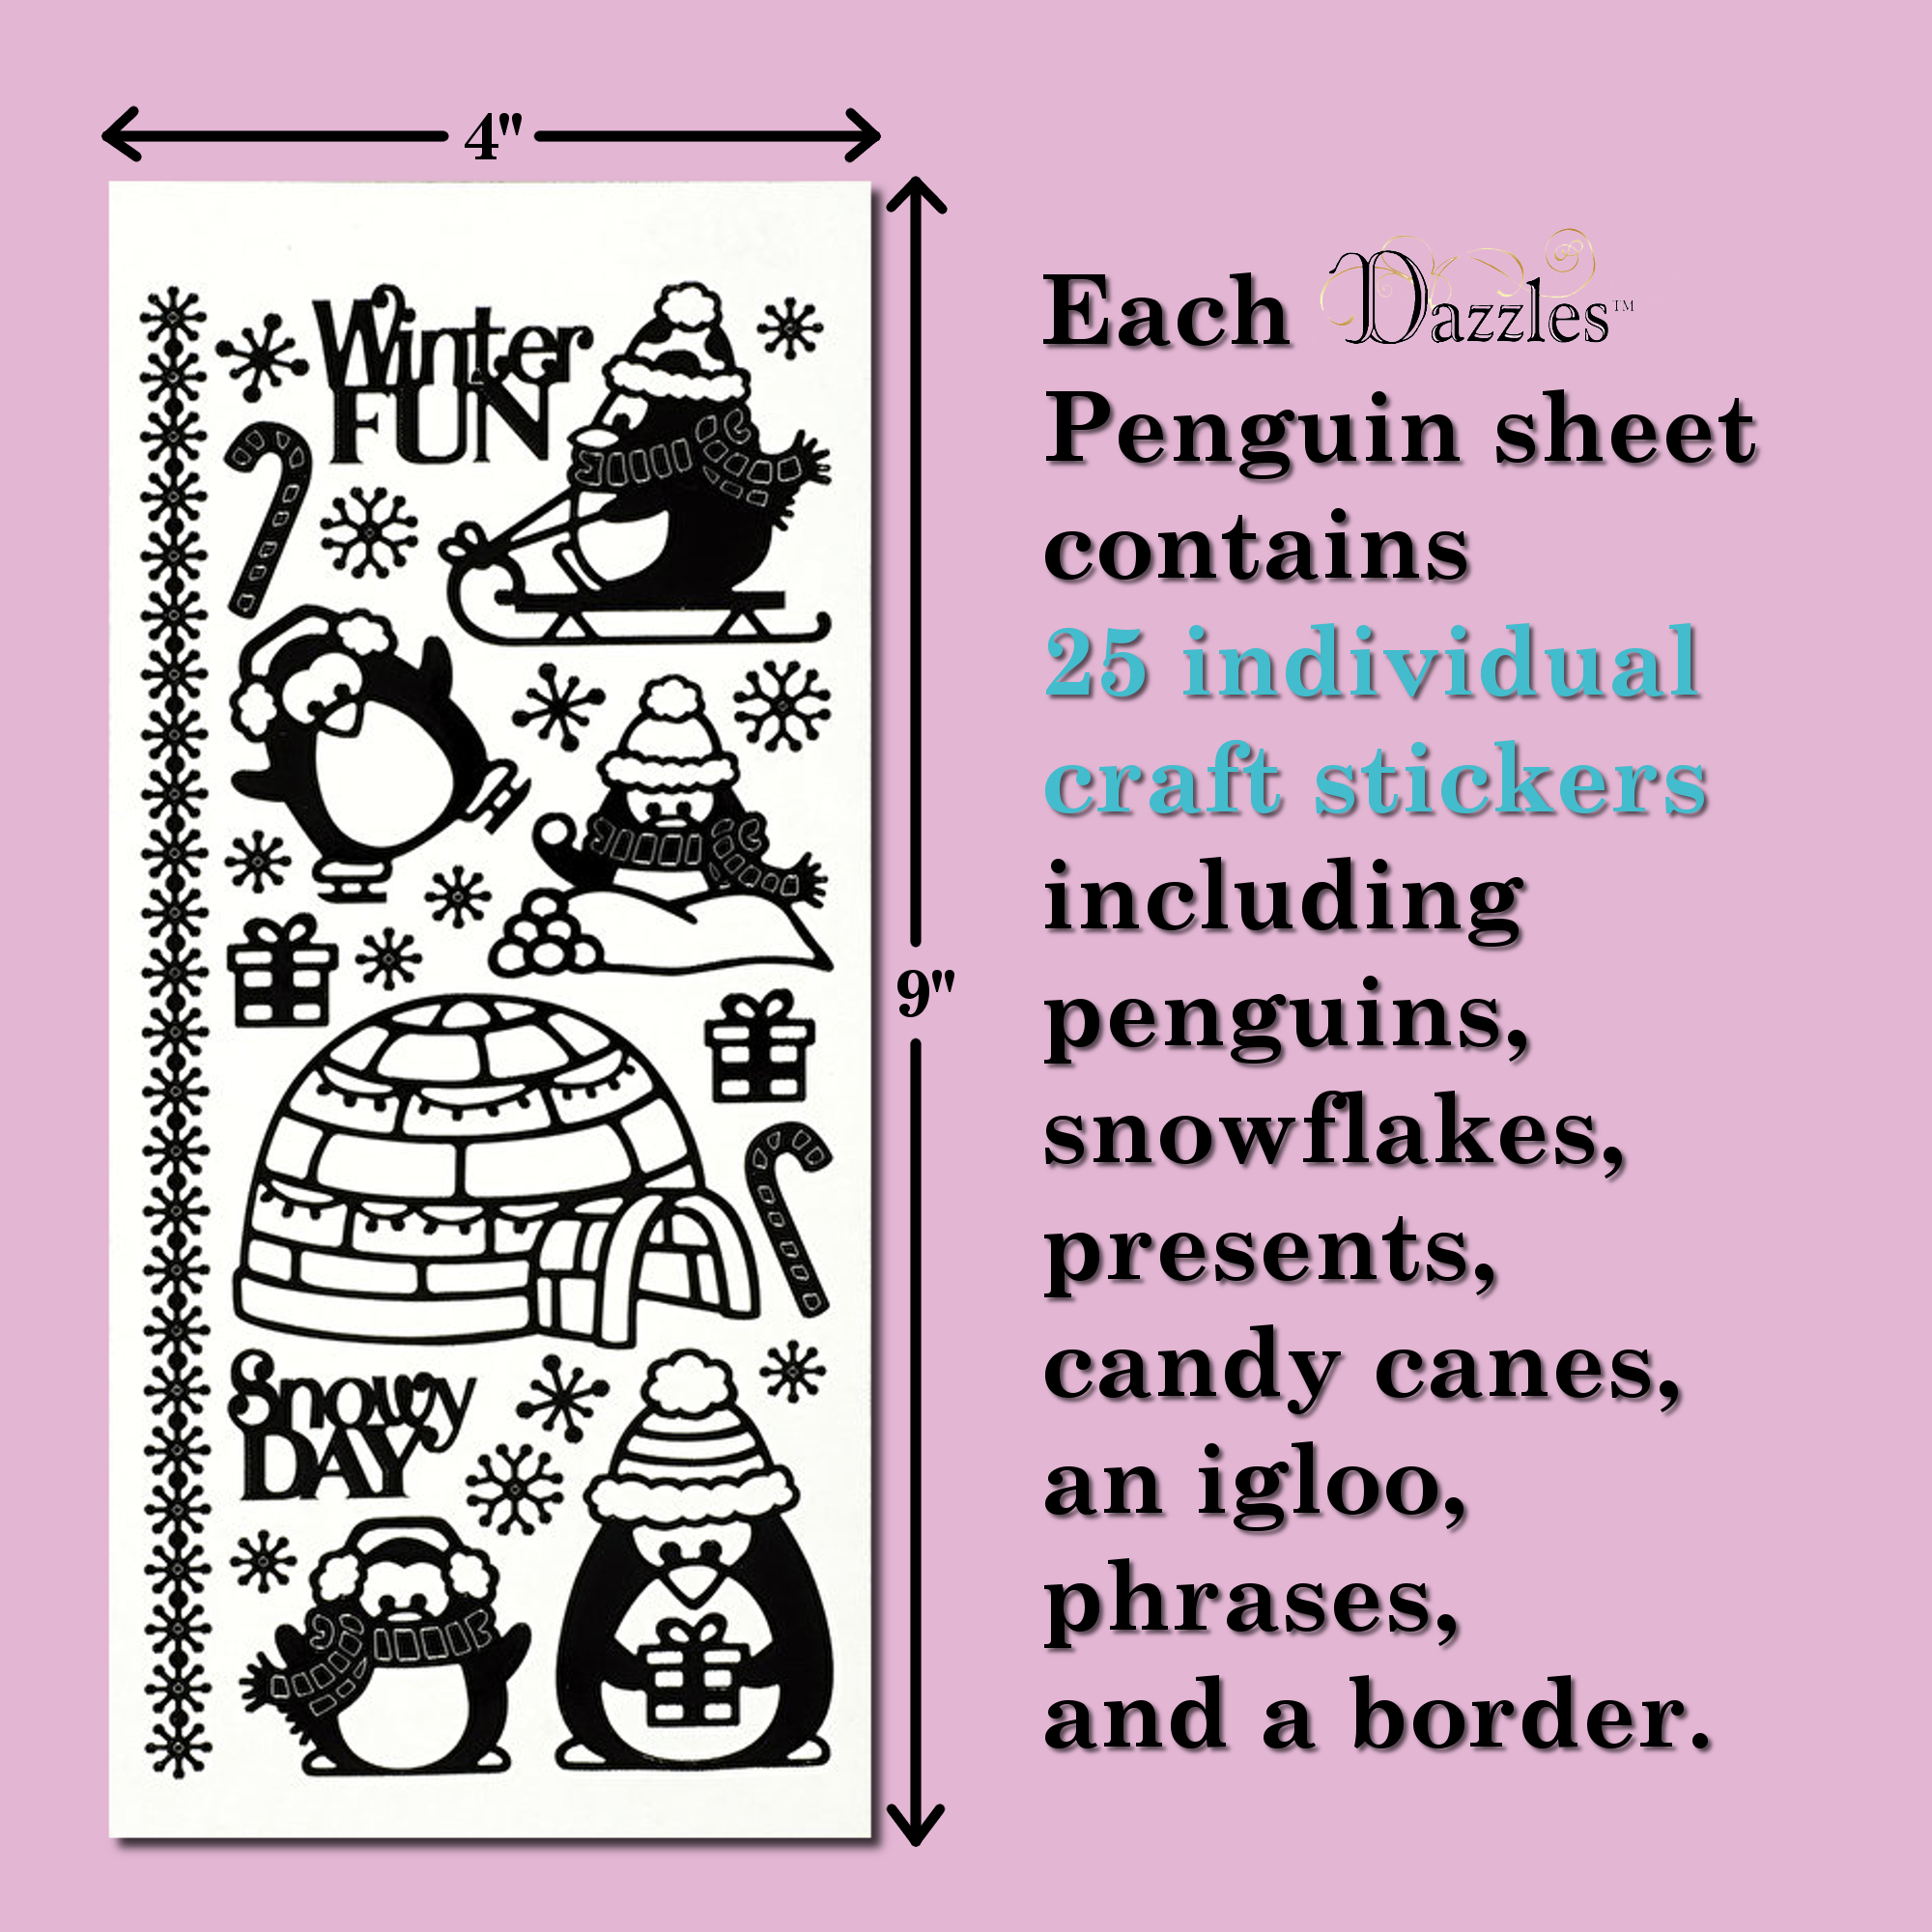 Uniporium Dazzles Stickers Collection | 300 Embossed Stickers of Polar Bears & Penguins in a Variety of Finishes & Colors for Scrapbooking, Card Making, Other Arts and Crafts Projects – 10 Sheets - image 3 of 6